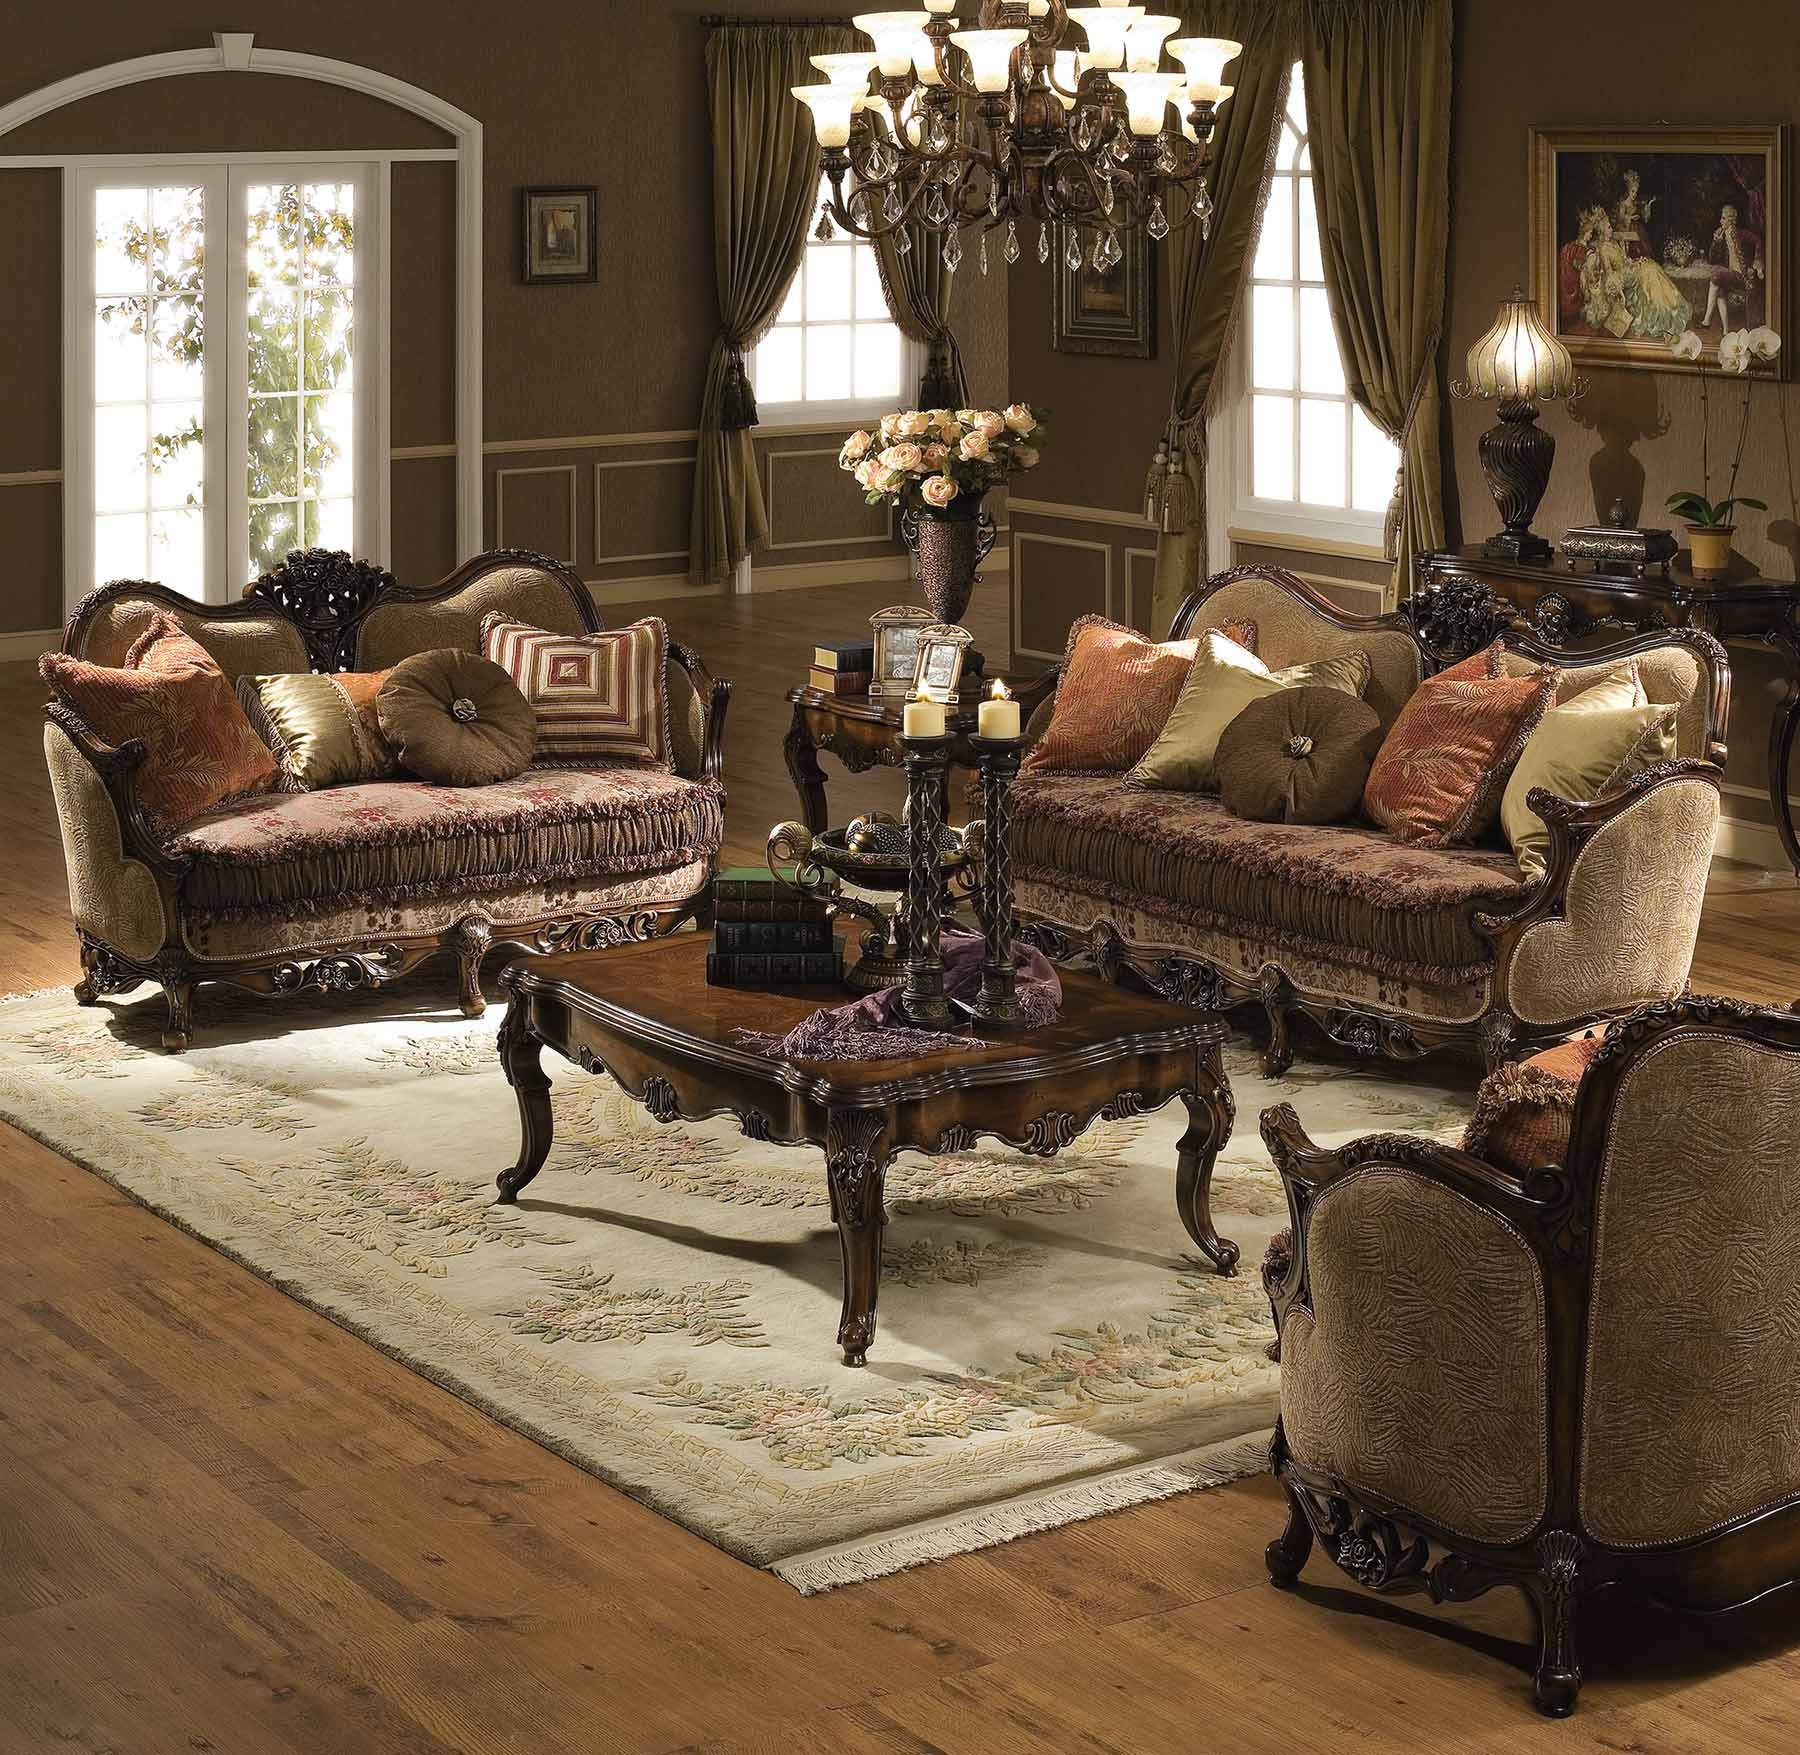 Victoria 5 Pc Living Room Set Antique, Victorian Living Room Furniture Collection